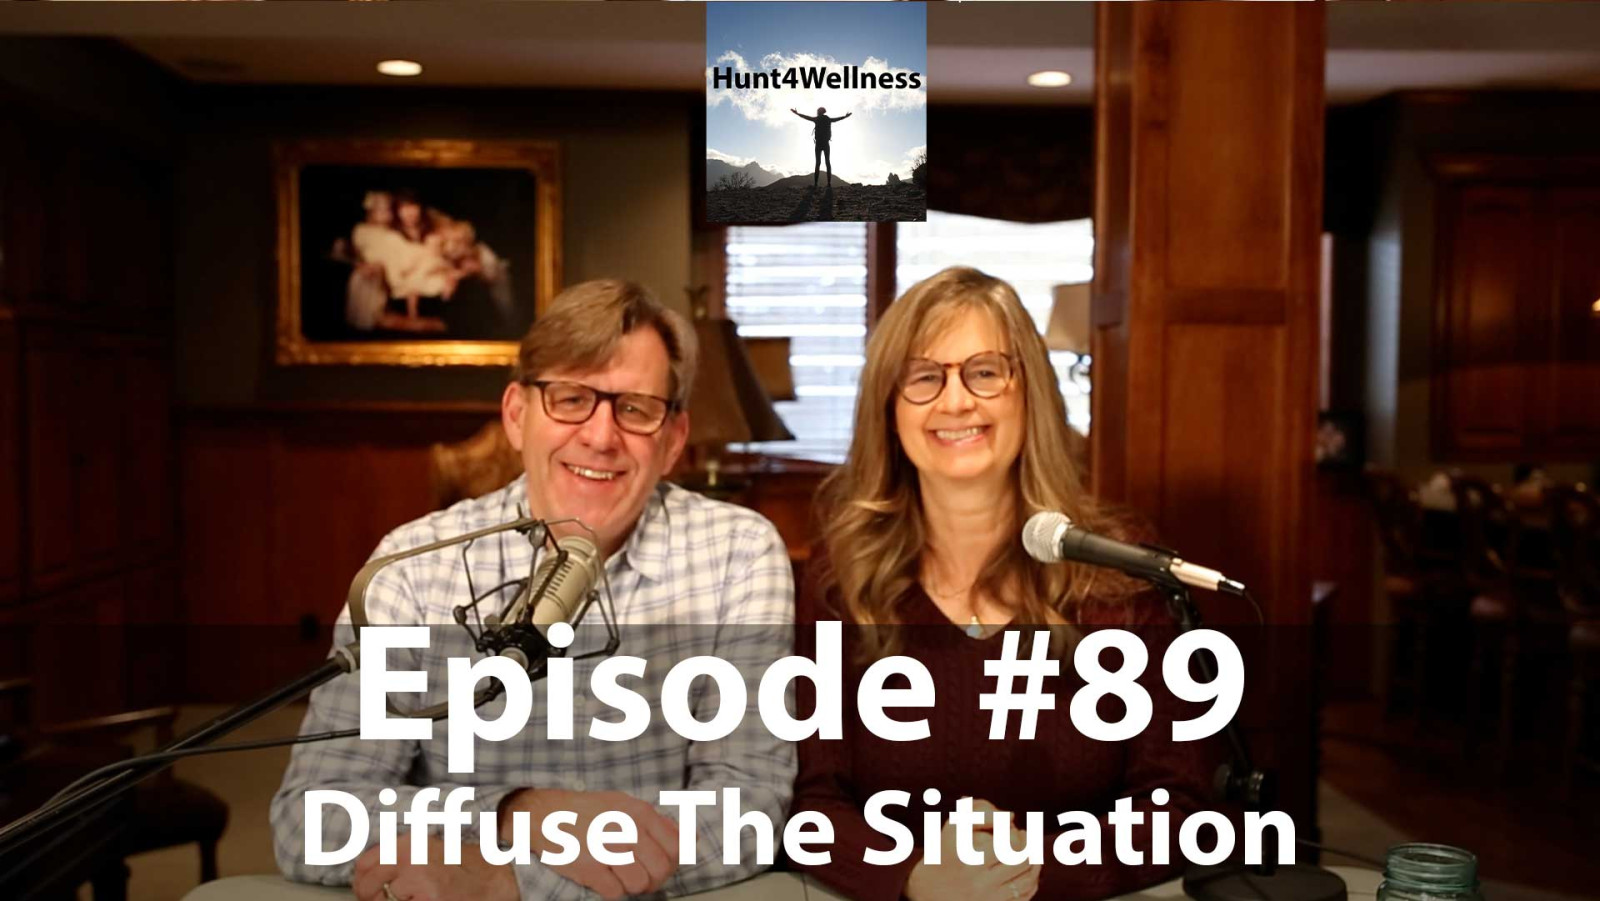 Episode #89 - Diffuse The Situation